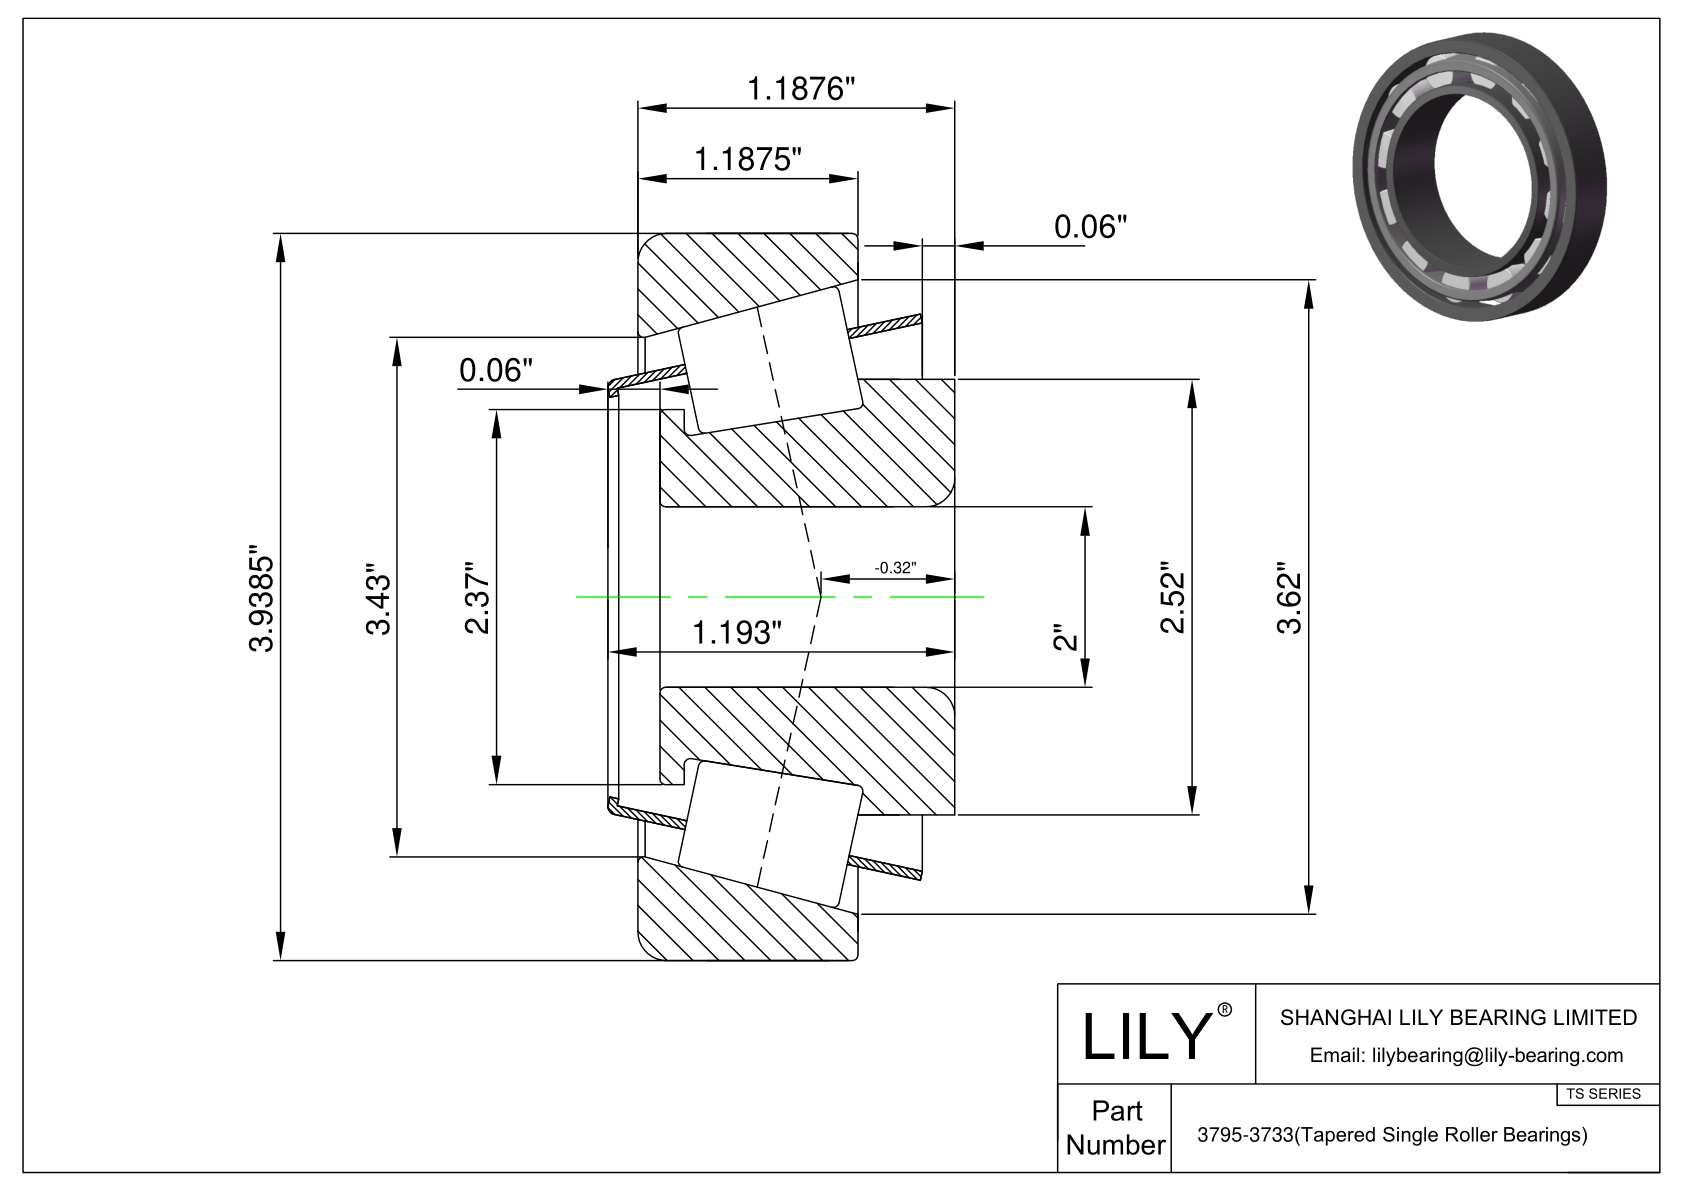 3795-3733 TS (Tapered Single Roller Bearings) (Imperial) cad drawing